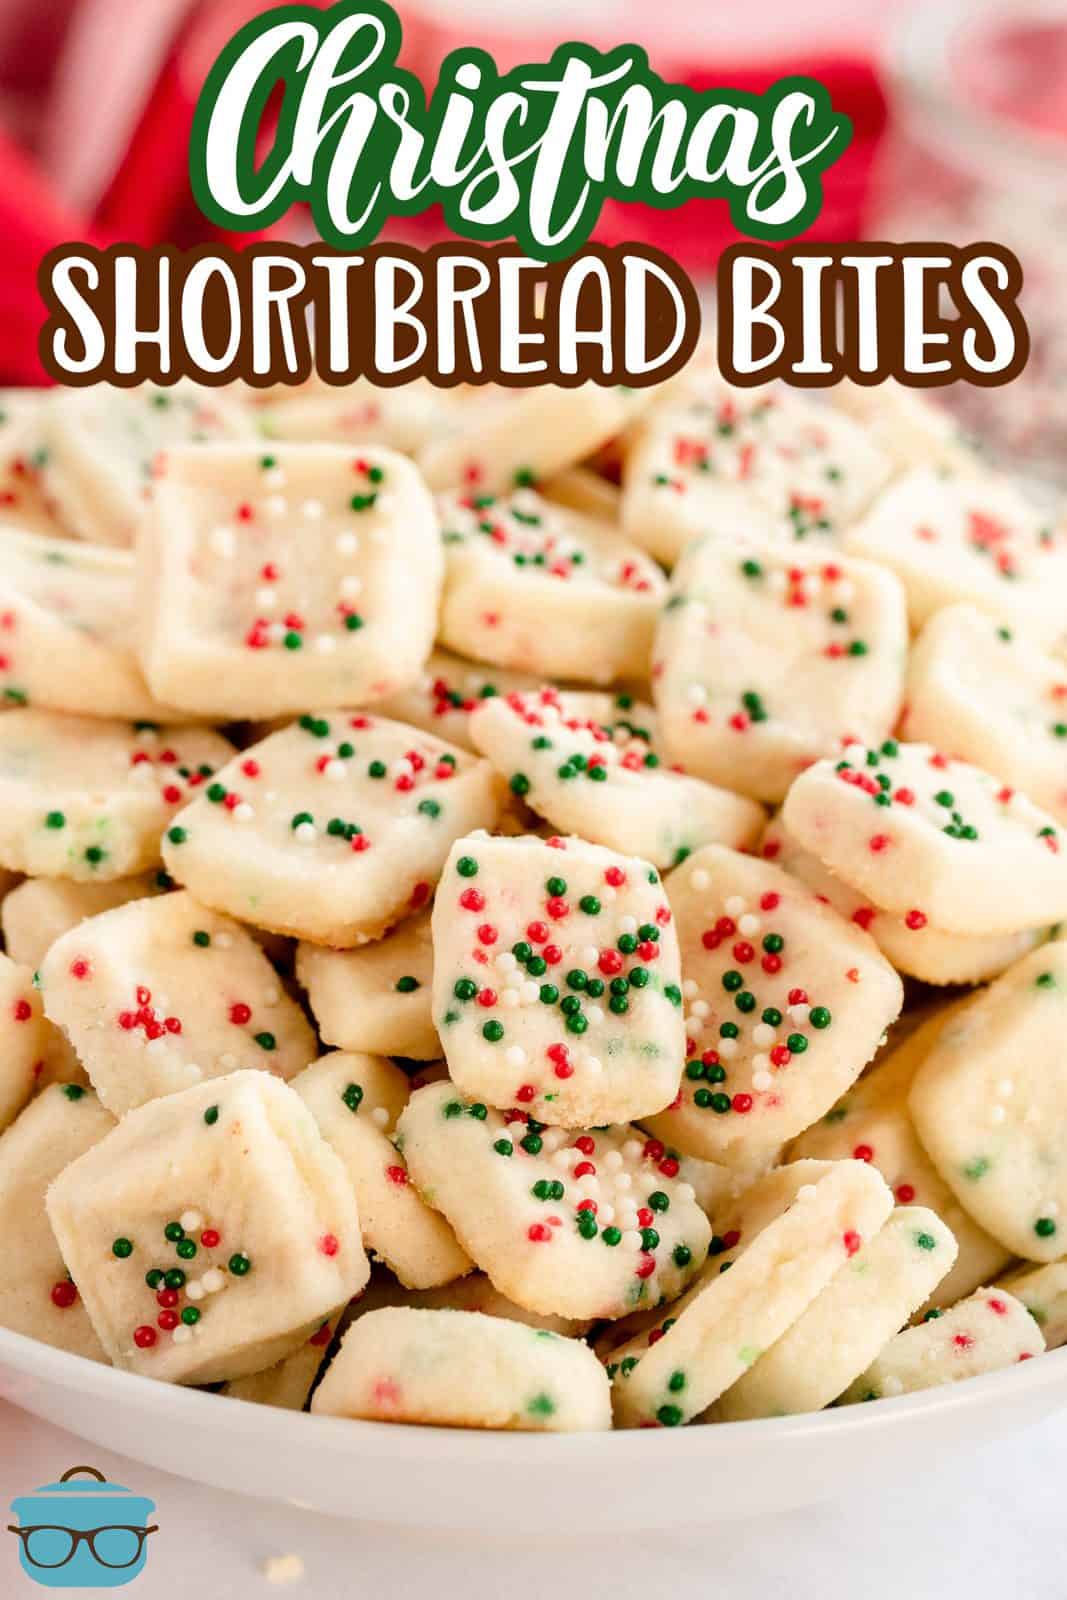 Pinterest image of Mini Christmas Shortbread Cookies close up in bowl.